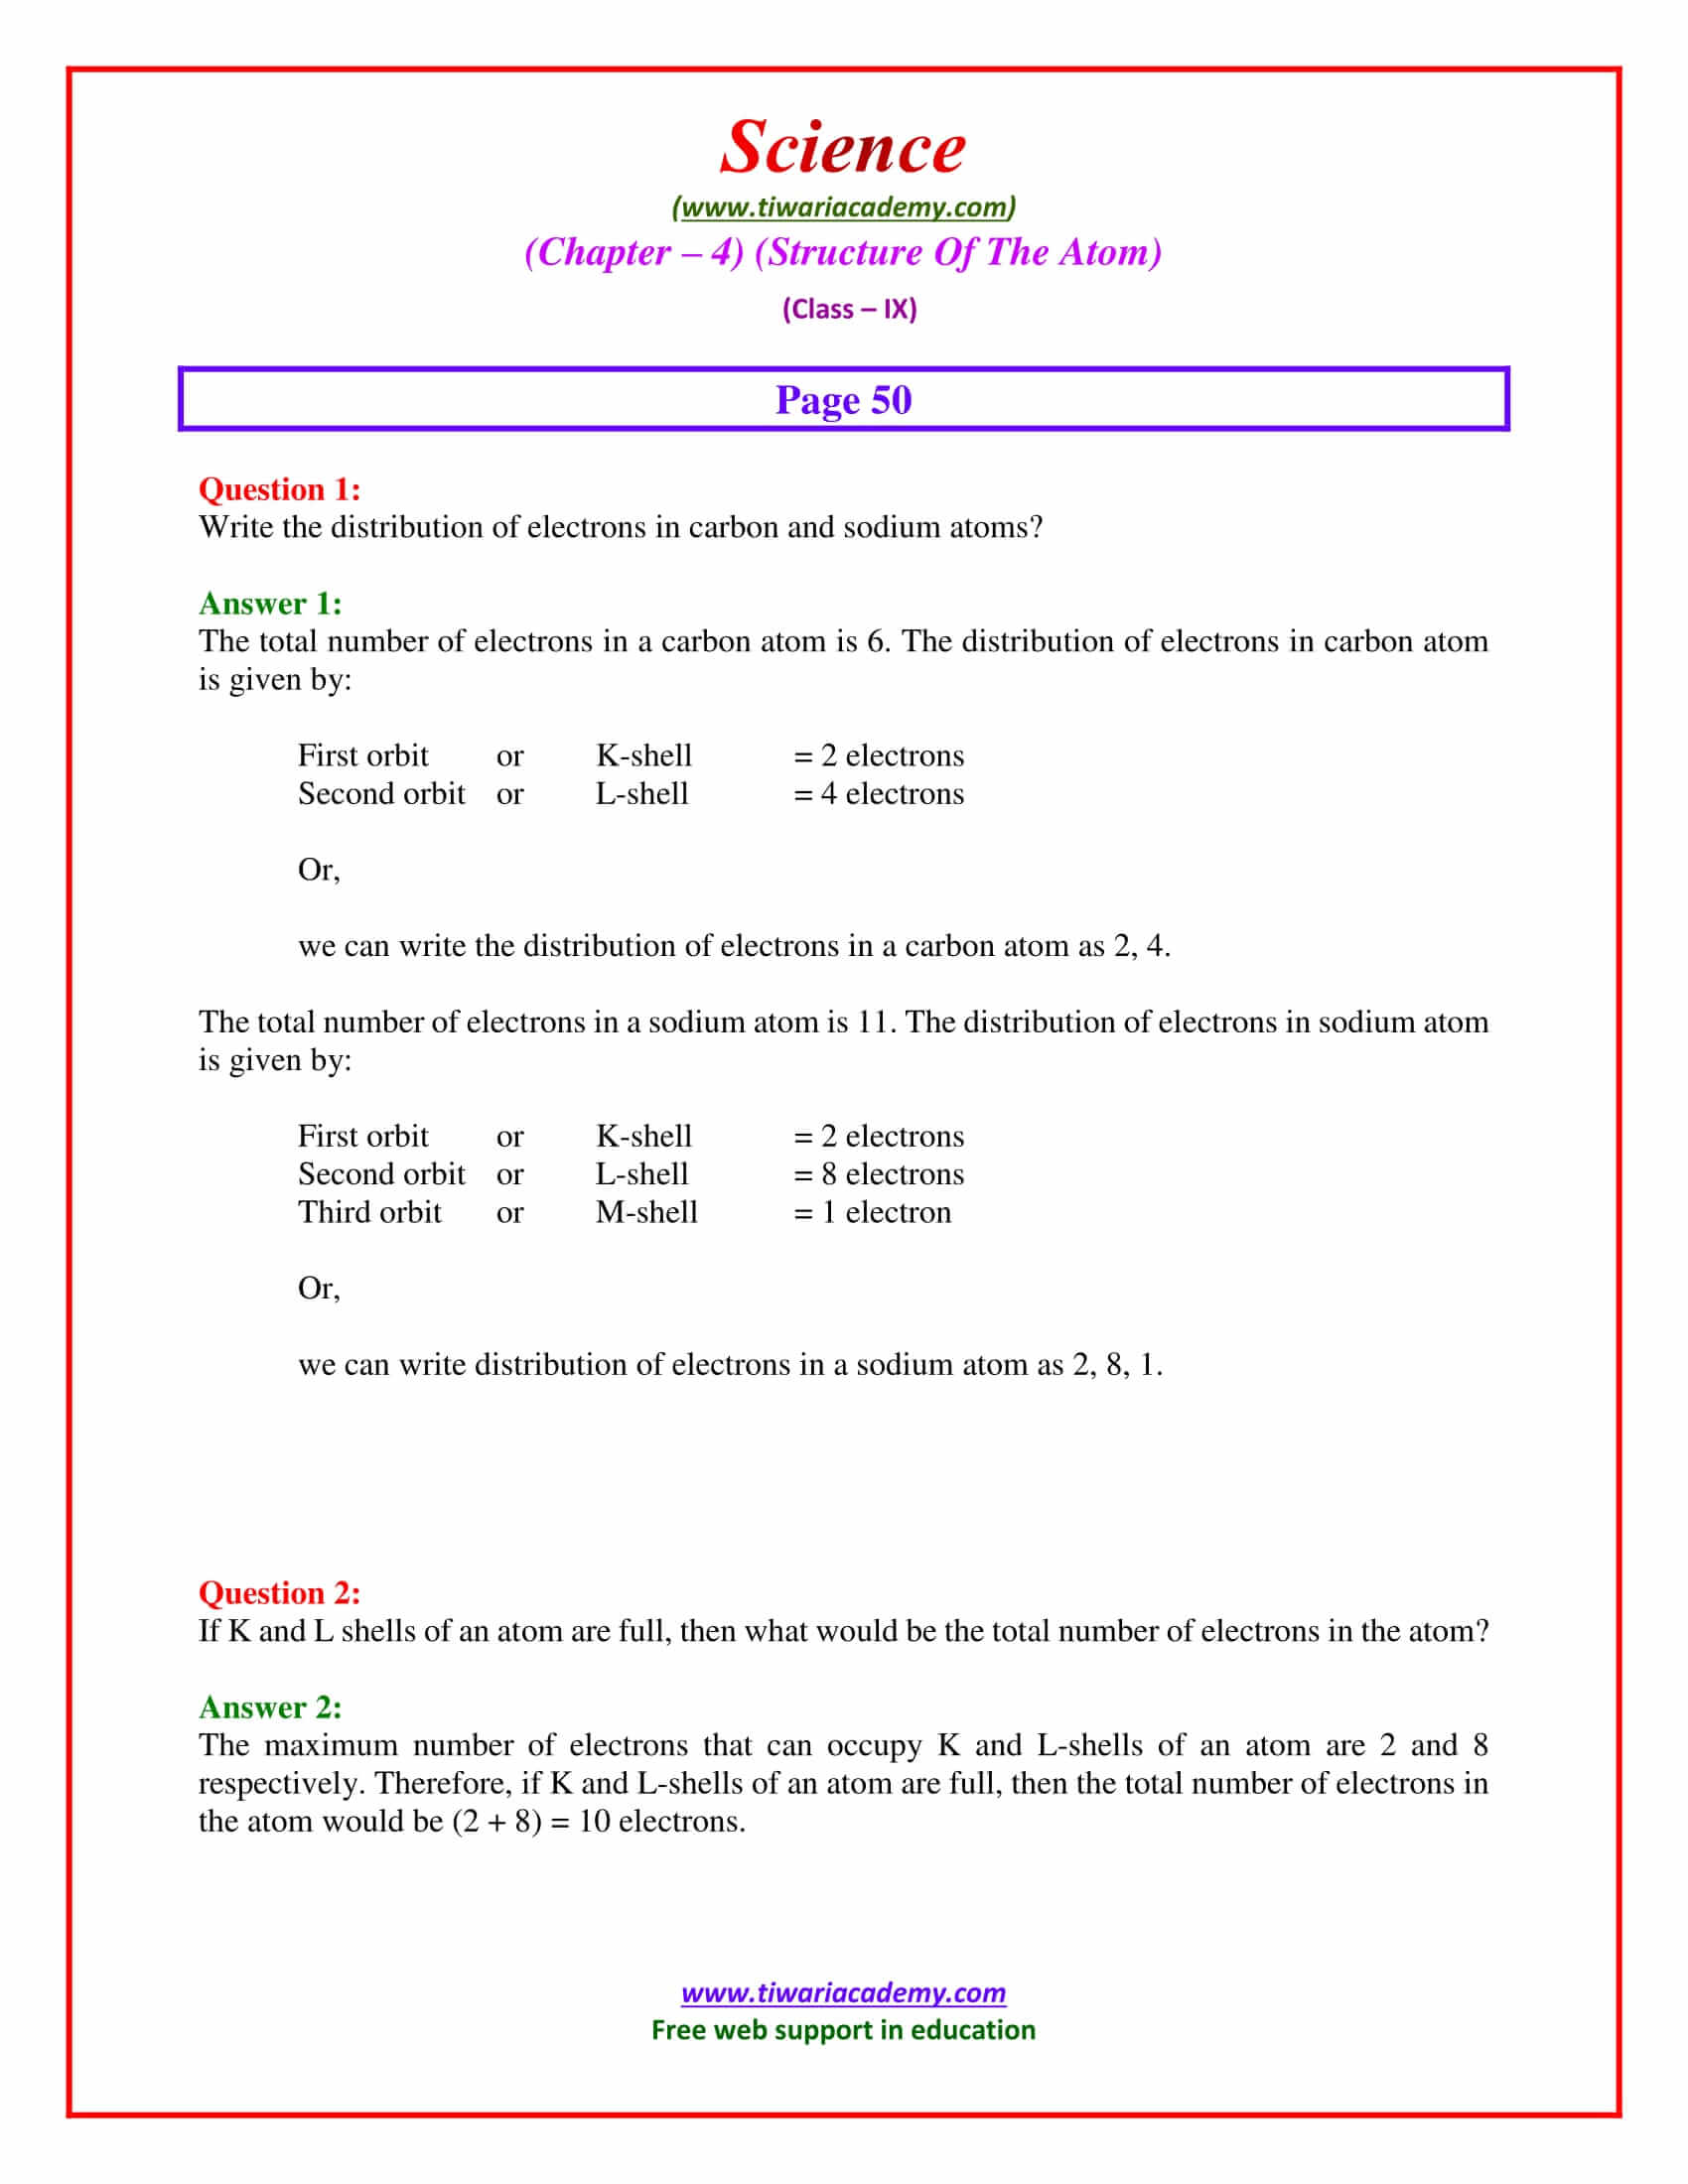 NCERT Solutions for Class 9 Science Chapter 4 intext questions page 50